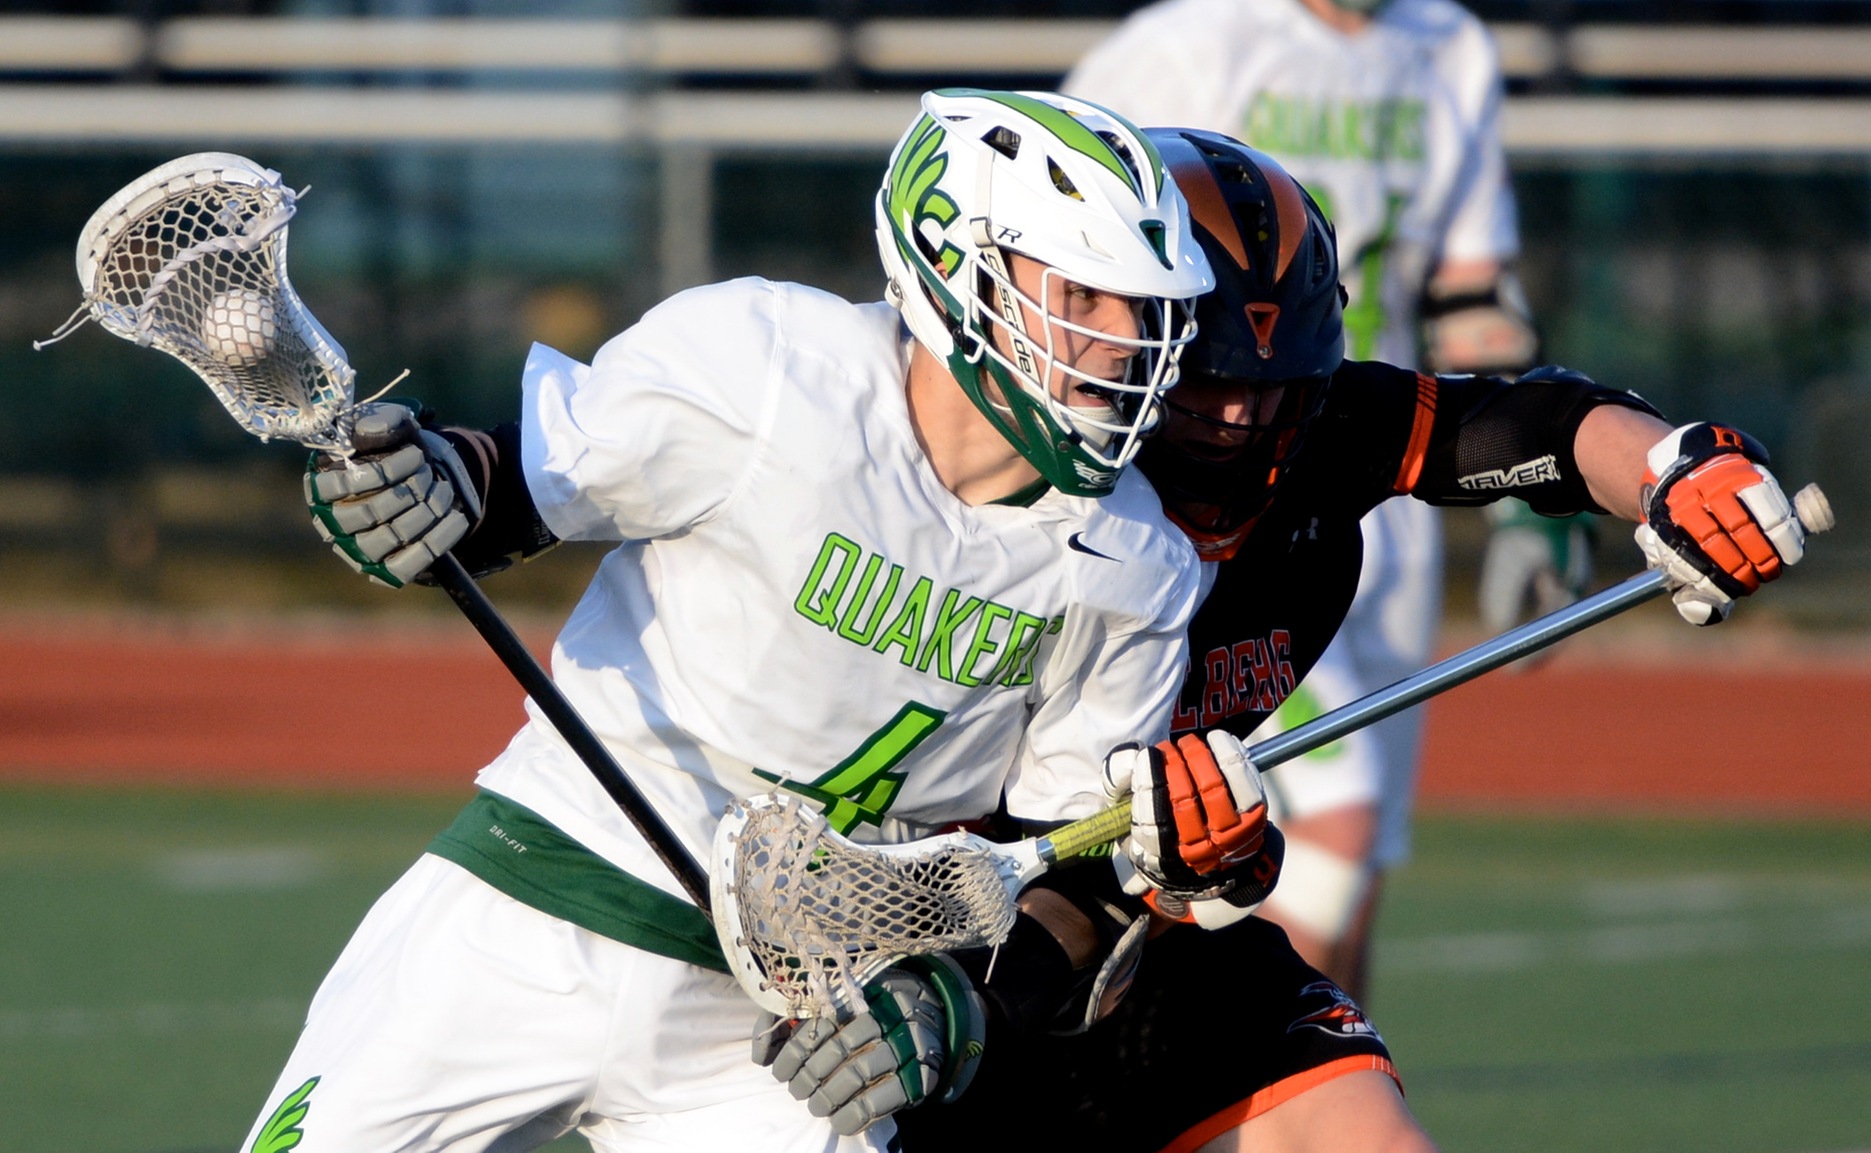 Lang's Two Goals Not Enough in Men's Lacrosse's 28-4 Loss to Capital